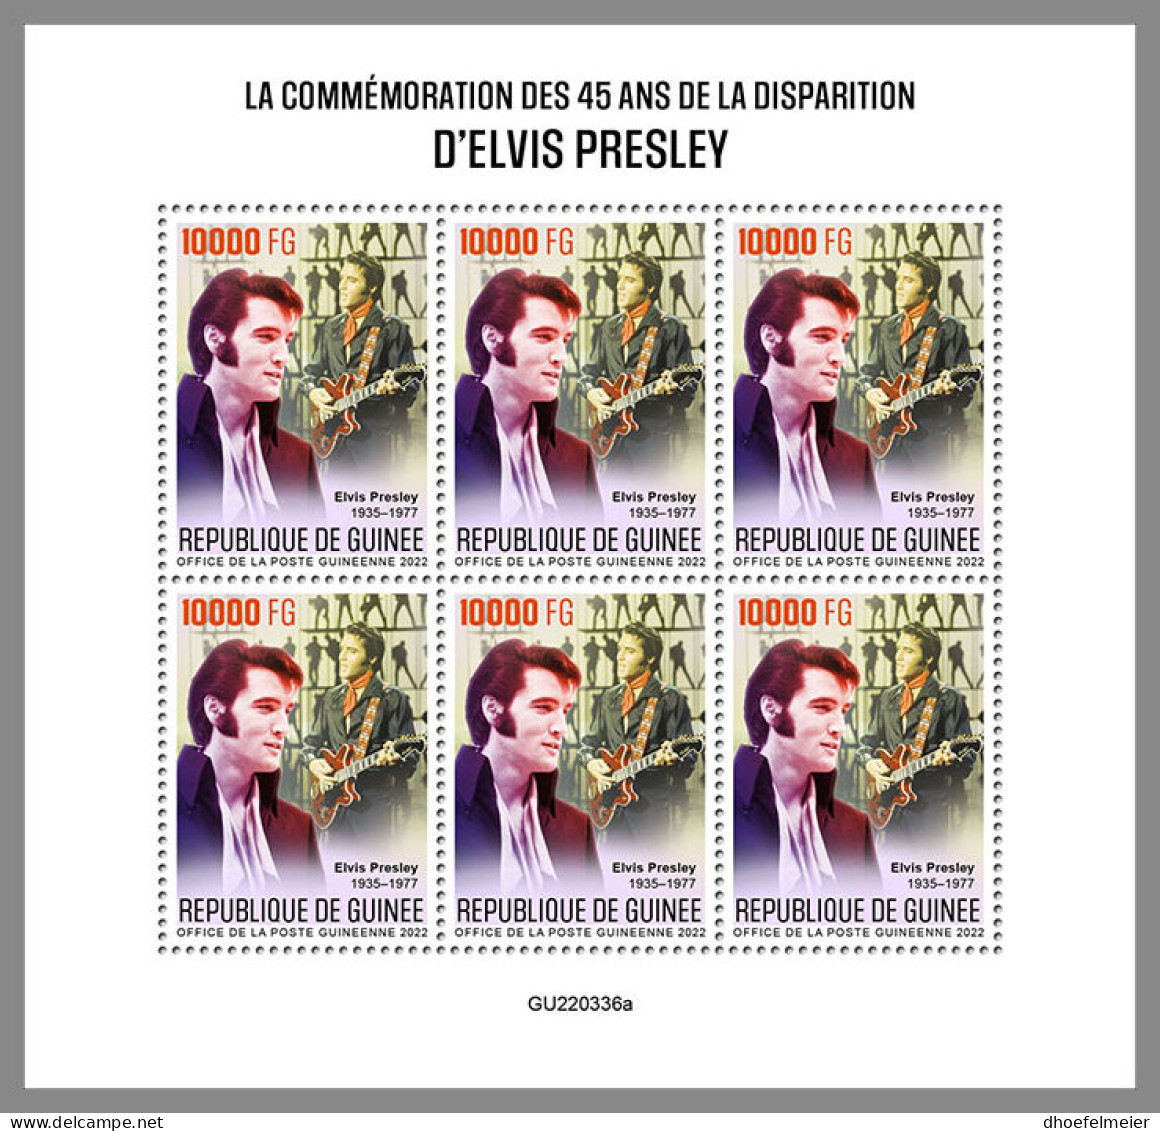 GUINEA REP. 2022 MNH Elvis Presley M/S - OFFICIAL ISSUE - DHQ2322 - Elvis Presley